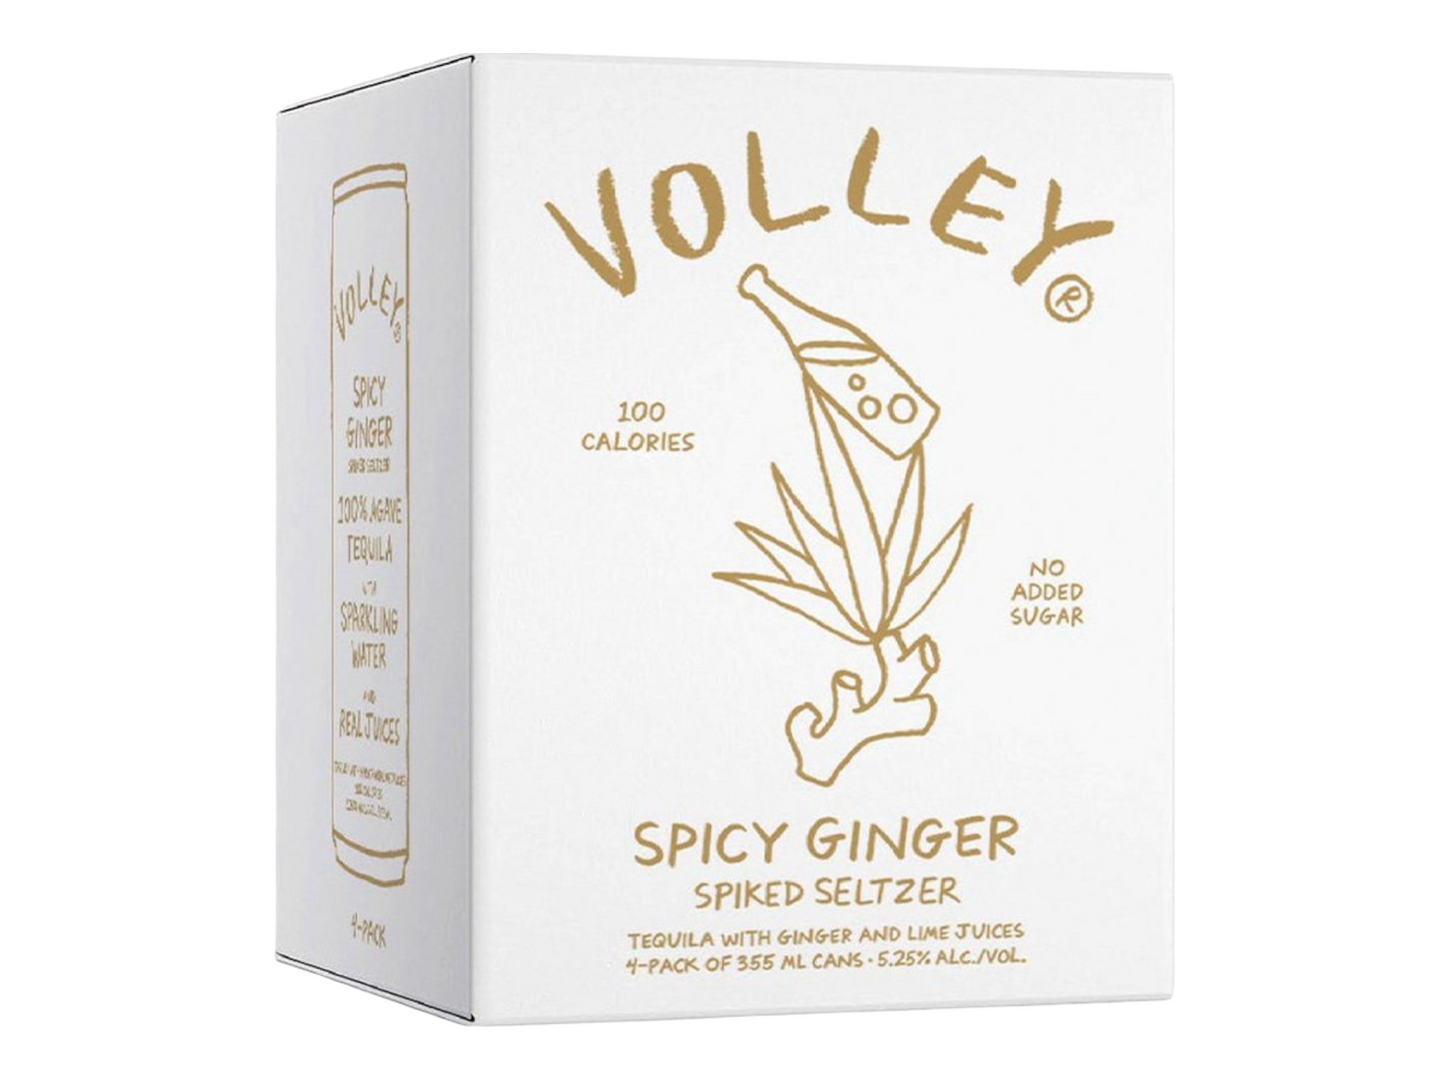 VOLLEY SPICY GINGER SPIKED SELTZER 4 PACK